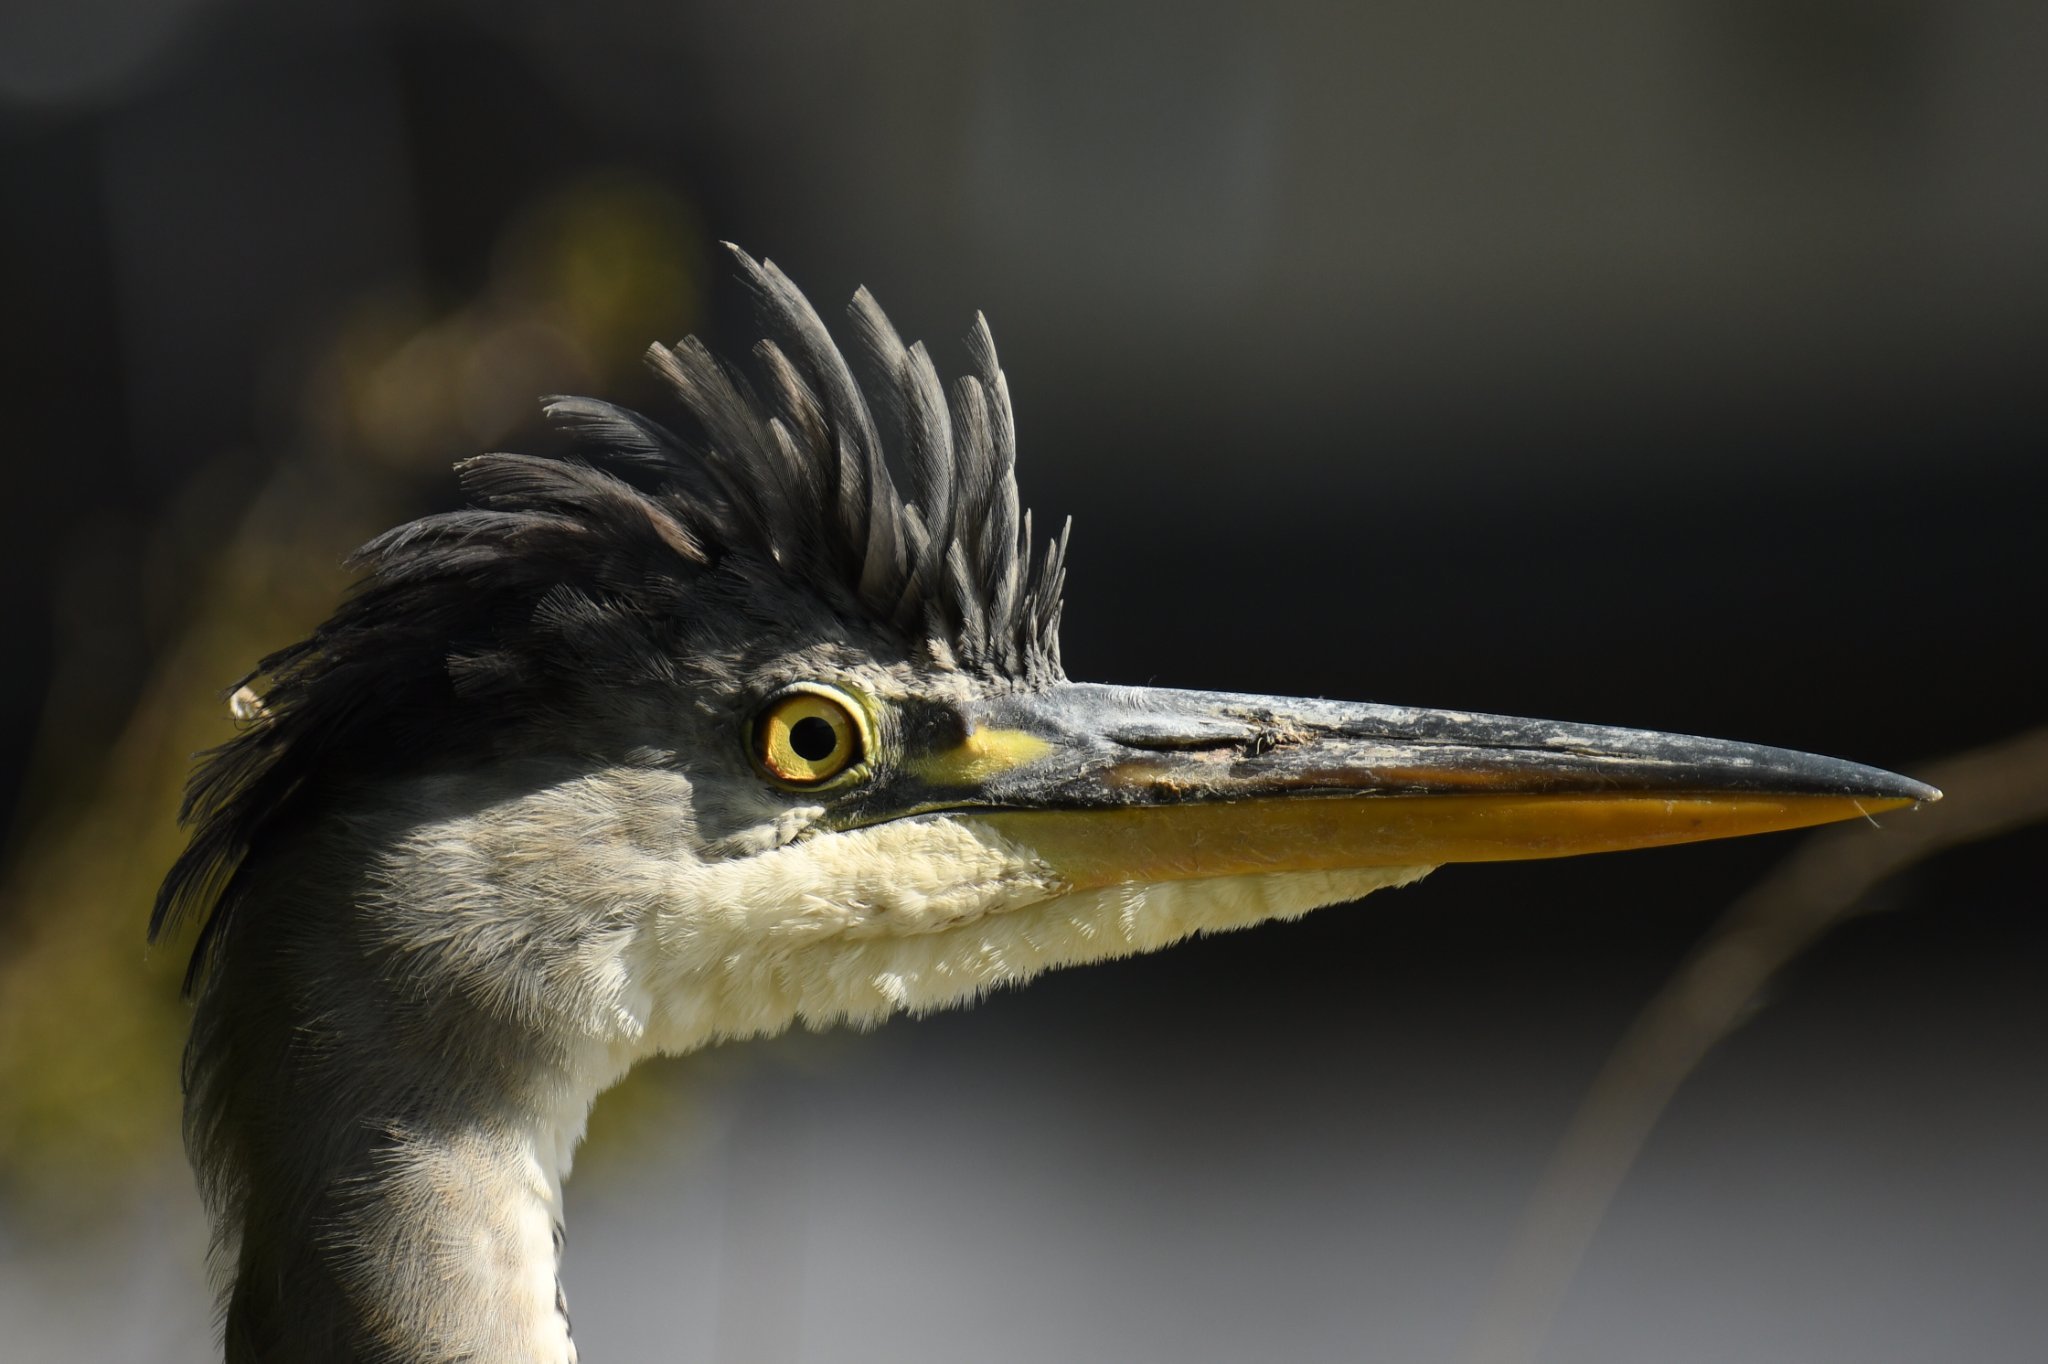 Paul Wrights close up of a heron